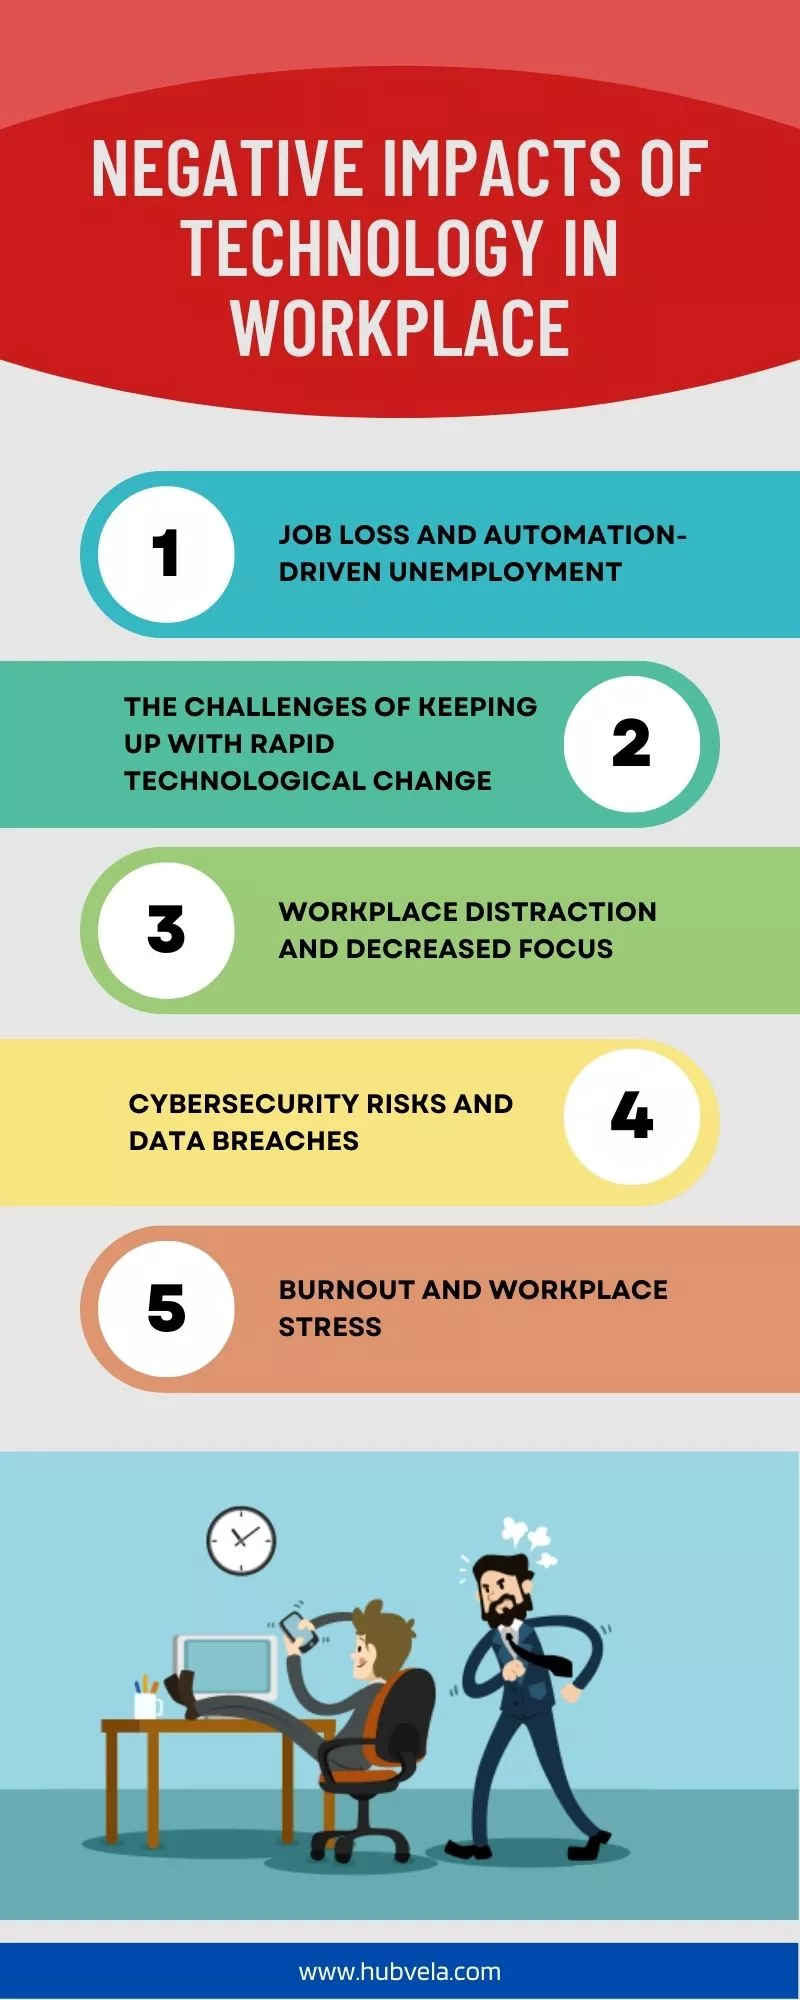 Negative Impacts of Technology on Workplace infographic